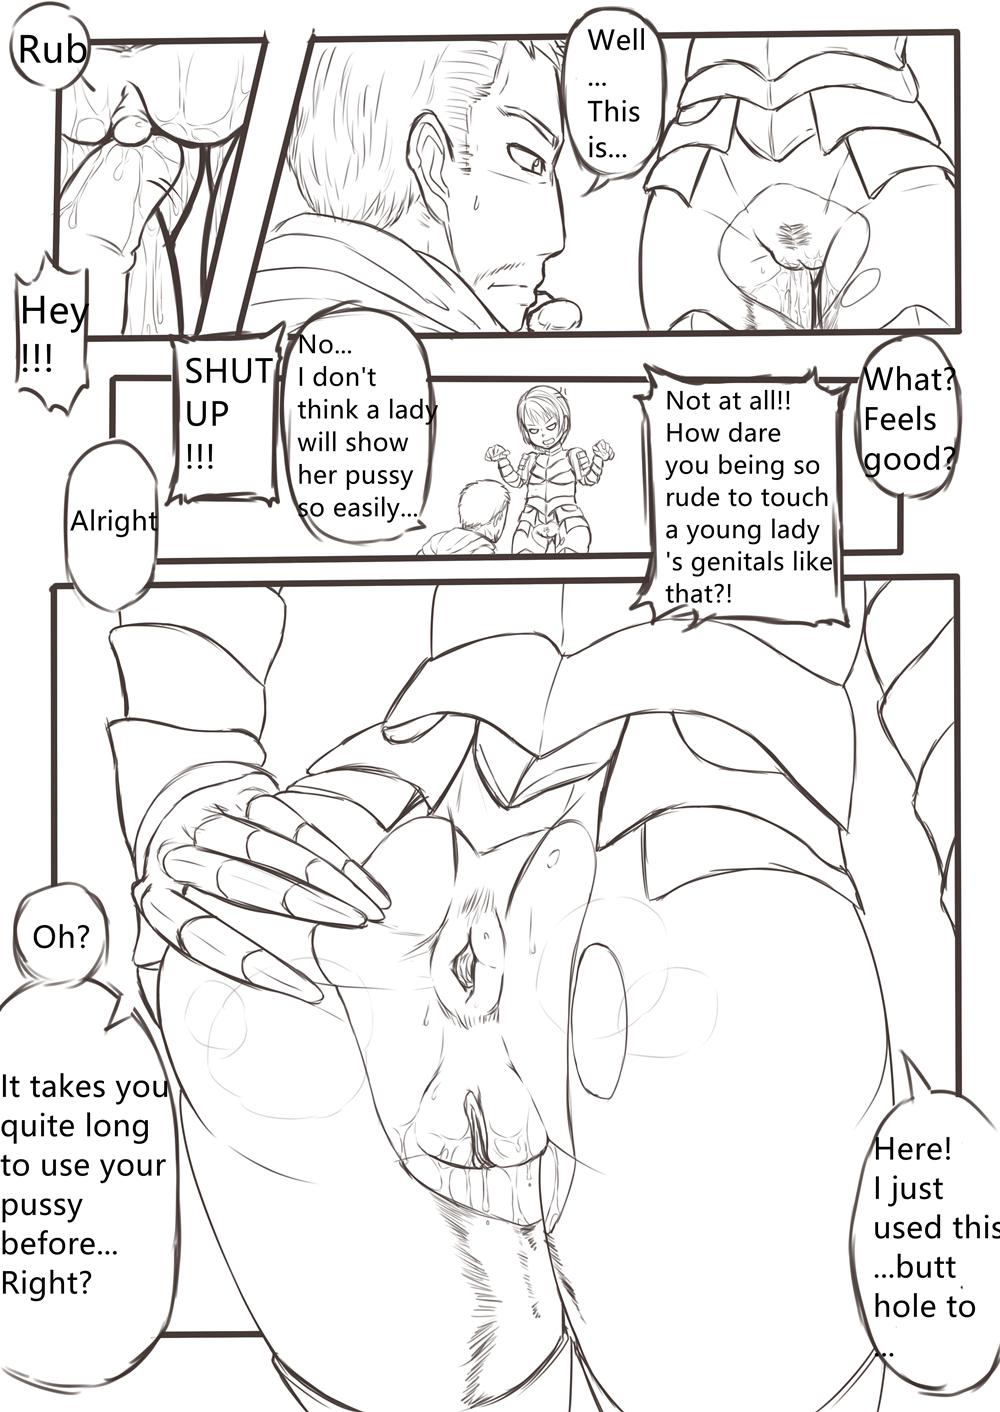 Amateurs DarkSouls3 ANAL ONLY - Demons souls Viet Nam - Page 8